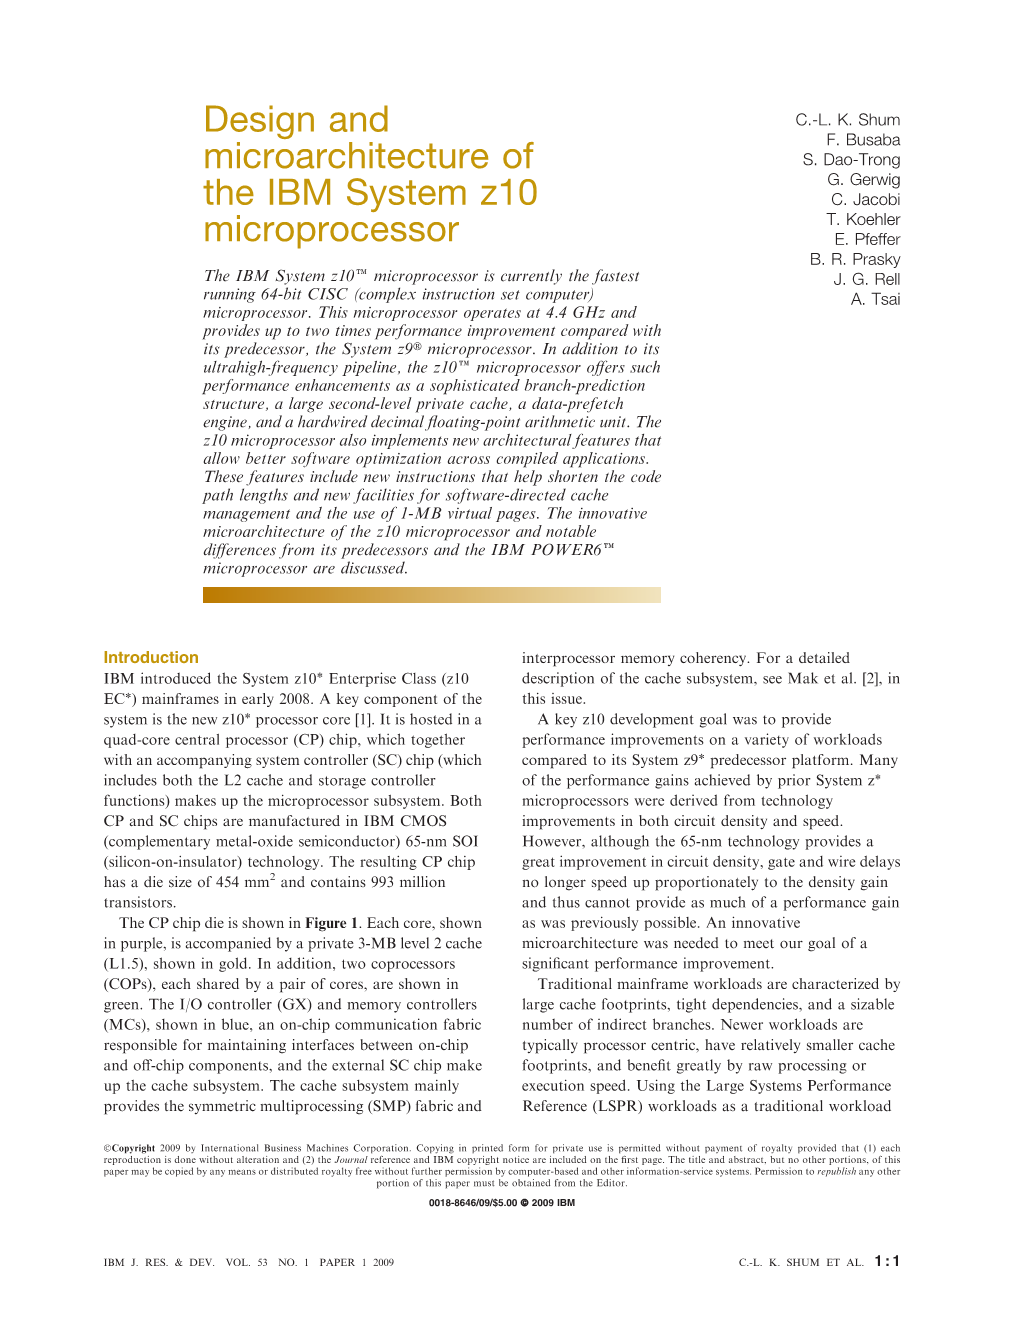 Design and Microarchitecture of the IBM System Z10 Microprocessor